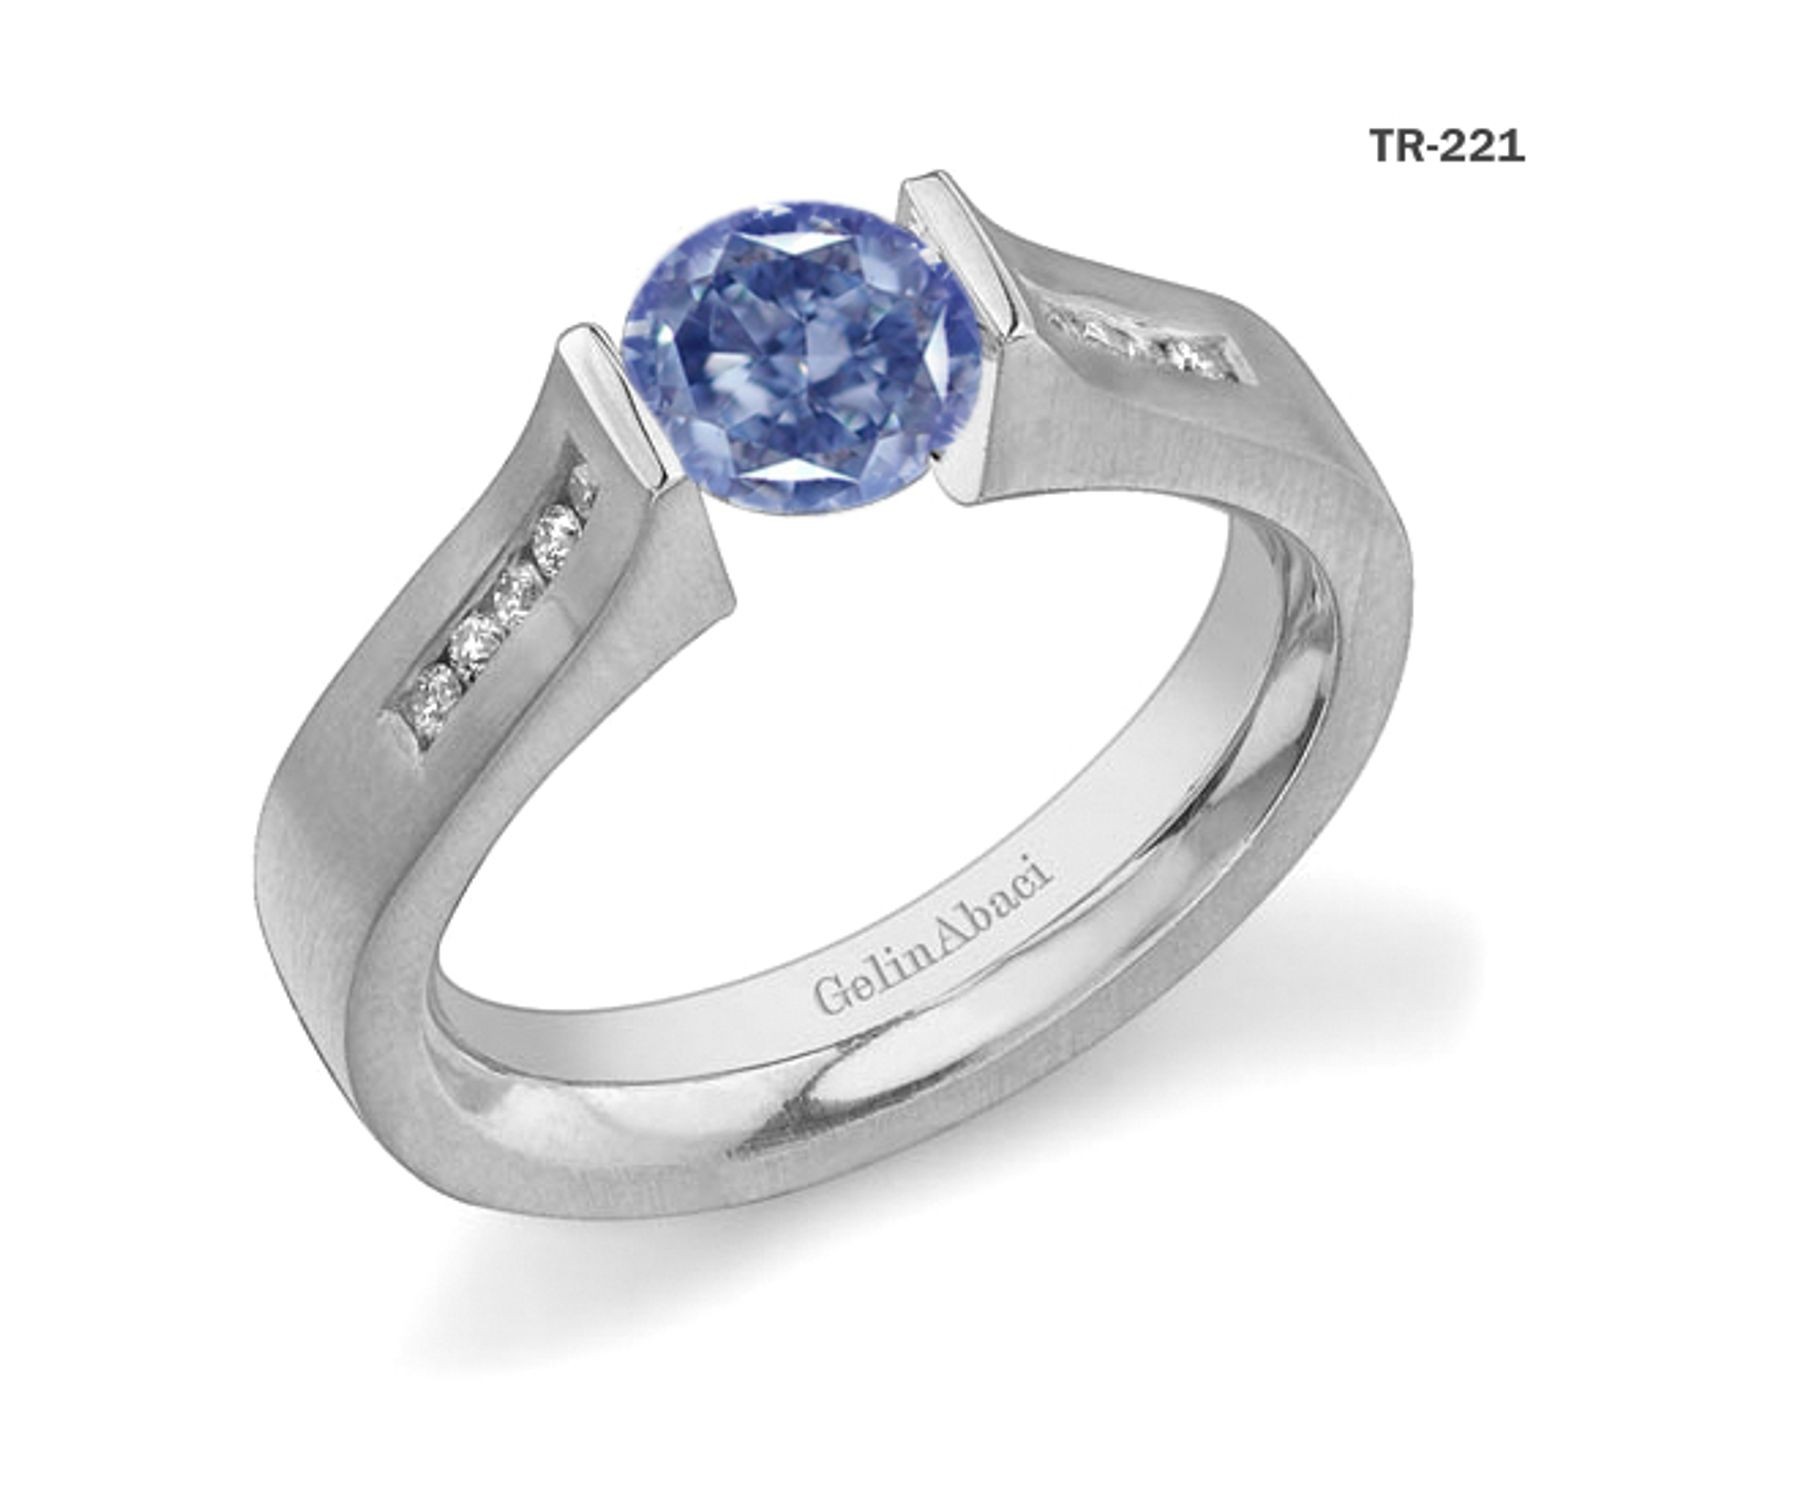 Contemporary High Quality Designer Blue Colored Diamond Tension Set Engagement Rings